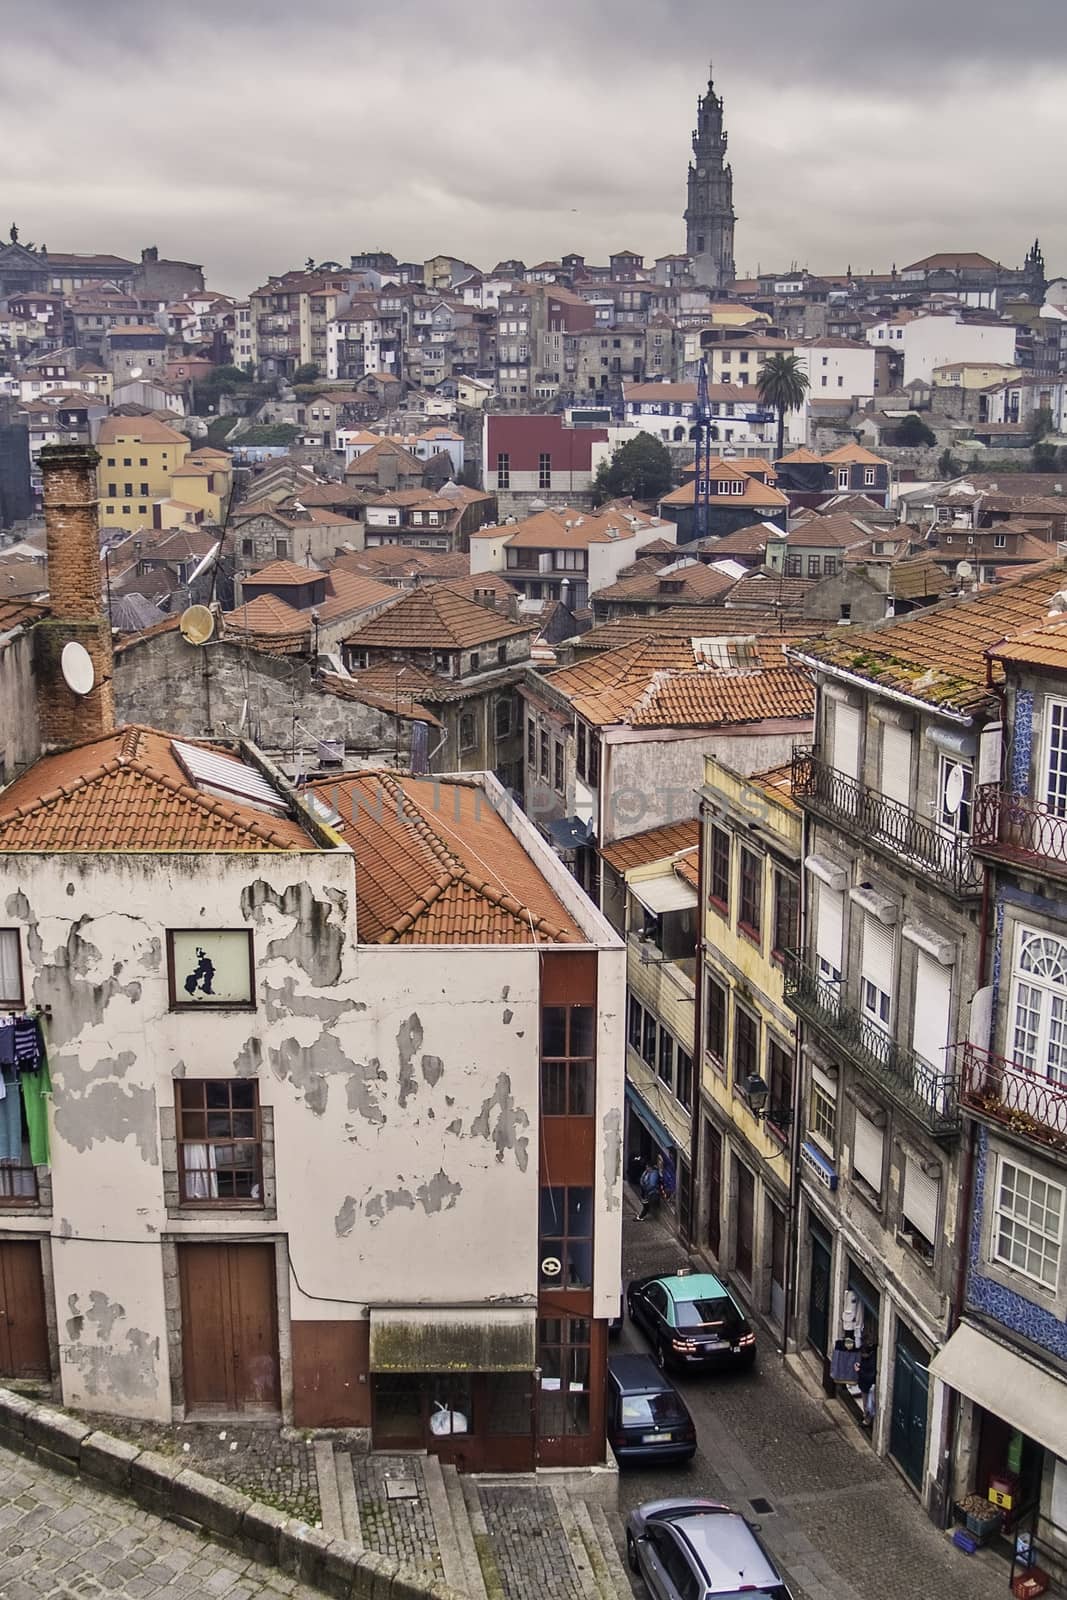 Oporto, December 2012. Downtown general view, UNESCO World Heritage Site.